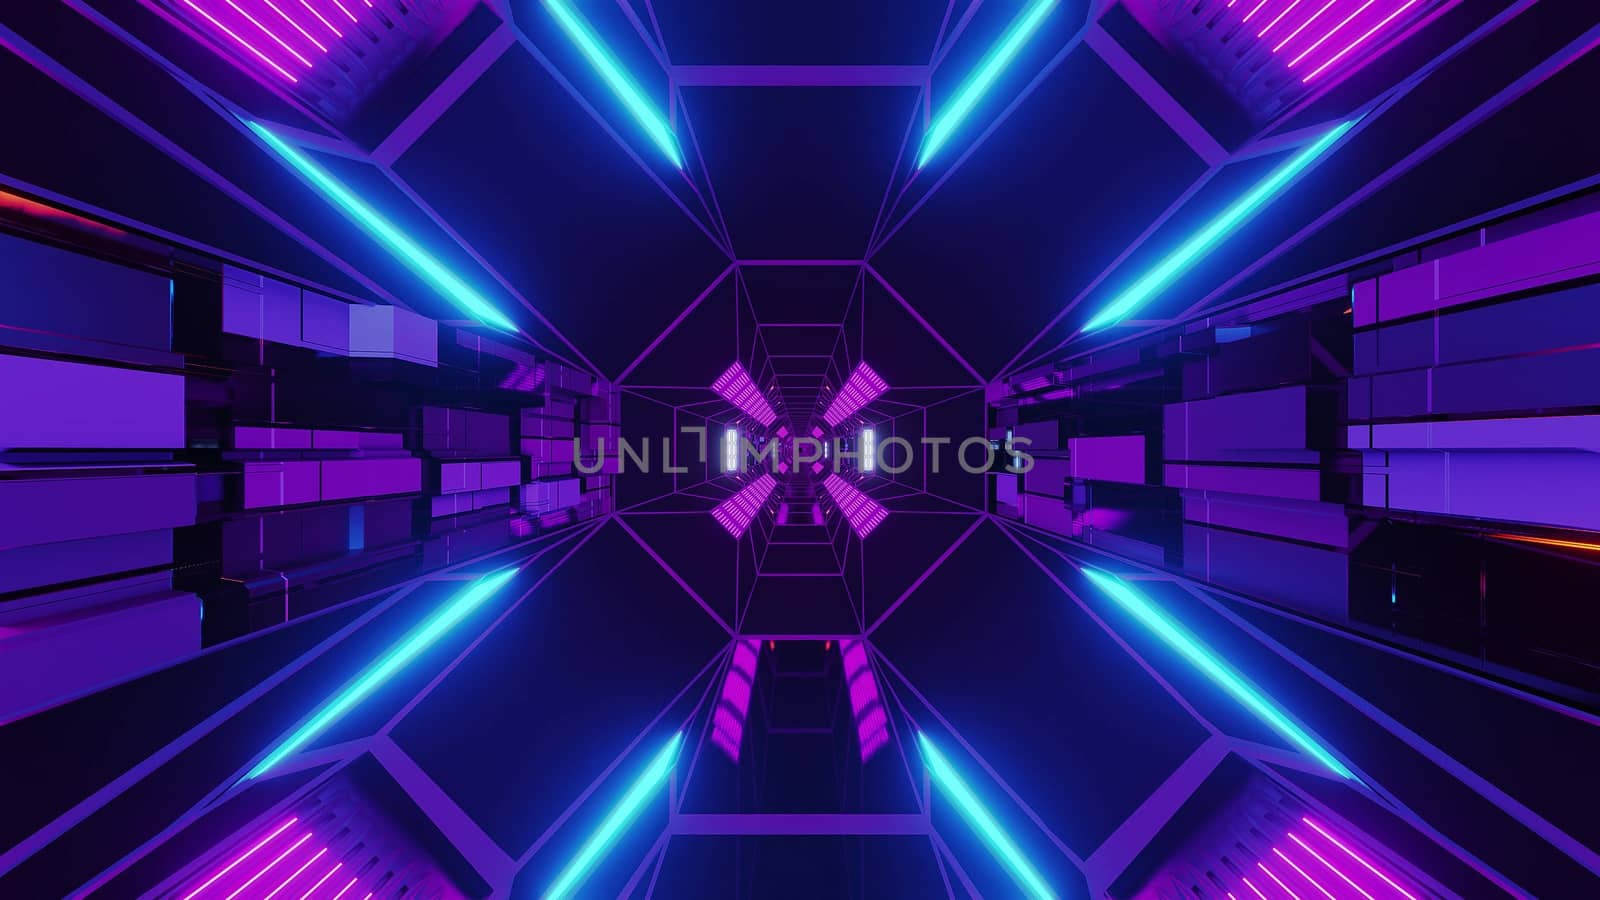 creative endless futurisic sci-fi tunnel corridor with technical texture 3d illustration wallpaper background graphic artwork, future building indoor space ship 3d rendering design